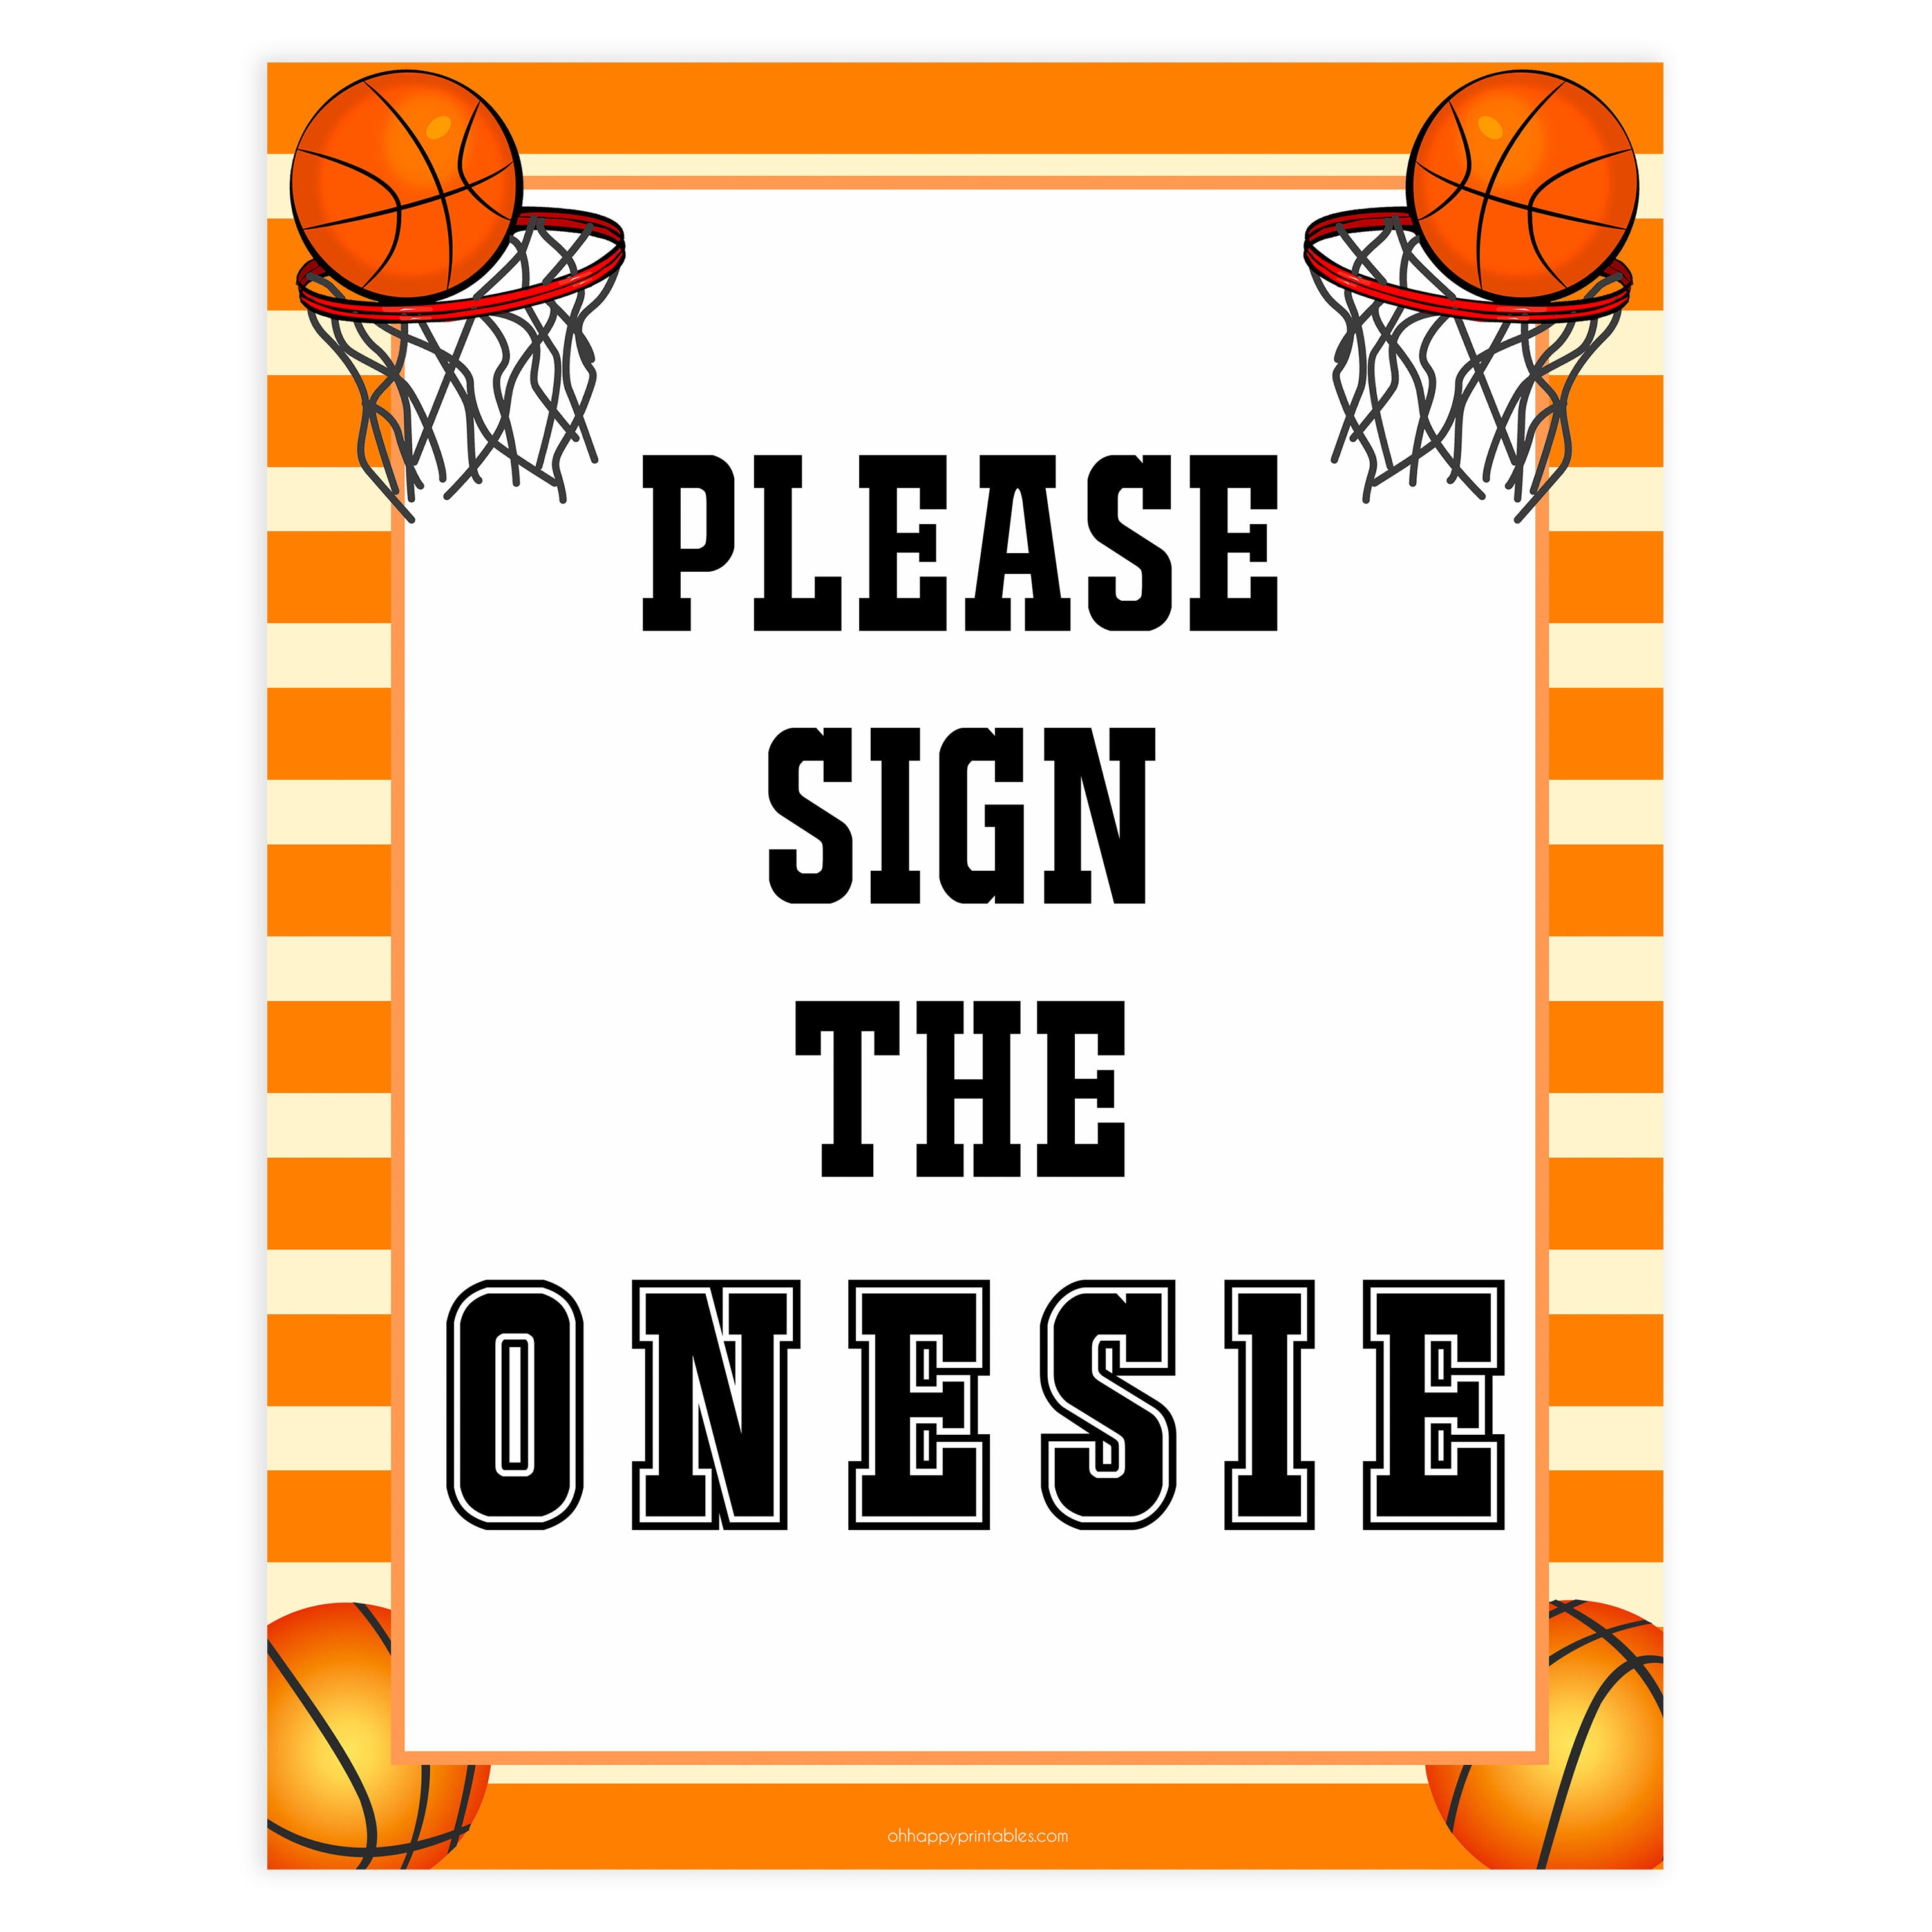 Please sign the onesie, sign the onesie, Printable baby shower games, basketball fun baby games, baby shower games, fun baby shower ideas, top baby shower ideas, basketball baby shower, basketball baby shower ideas